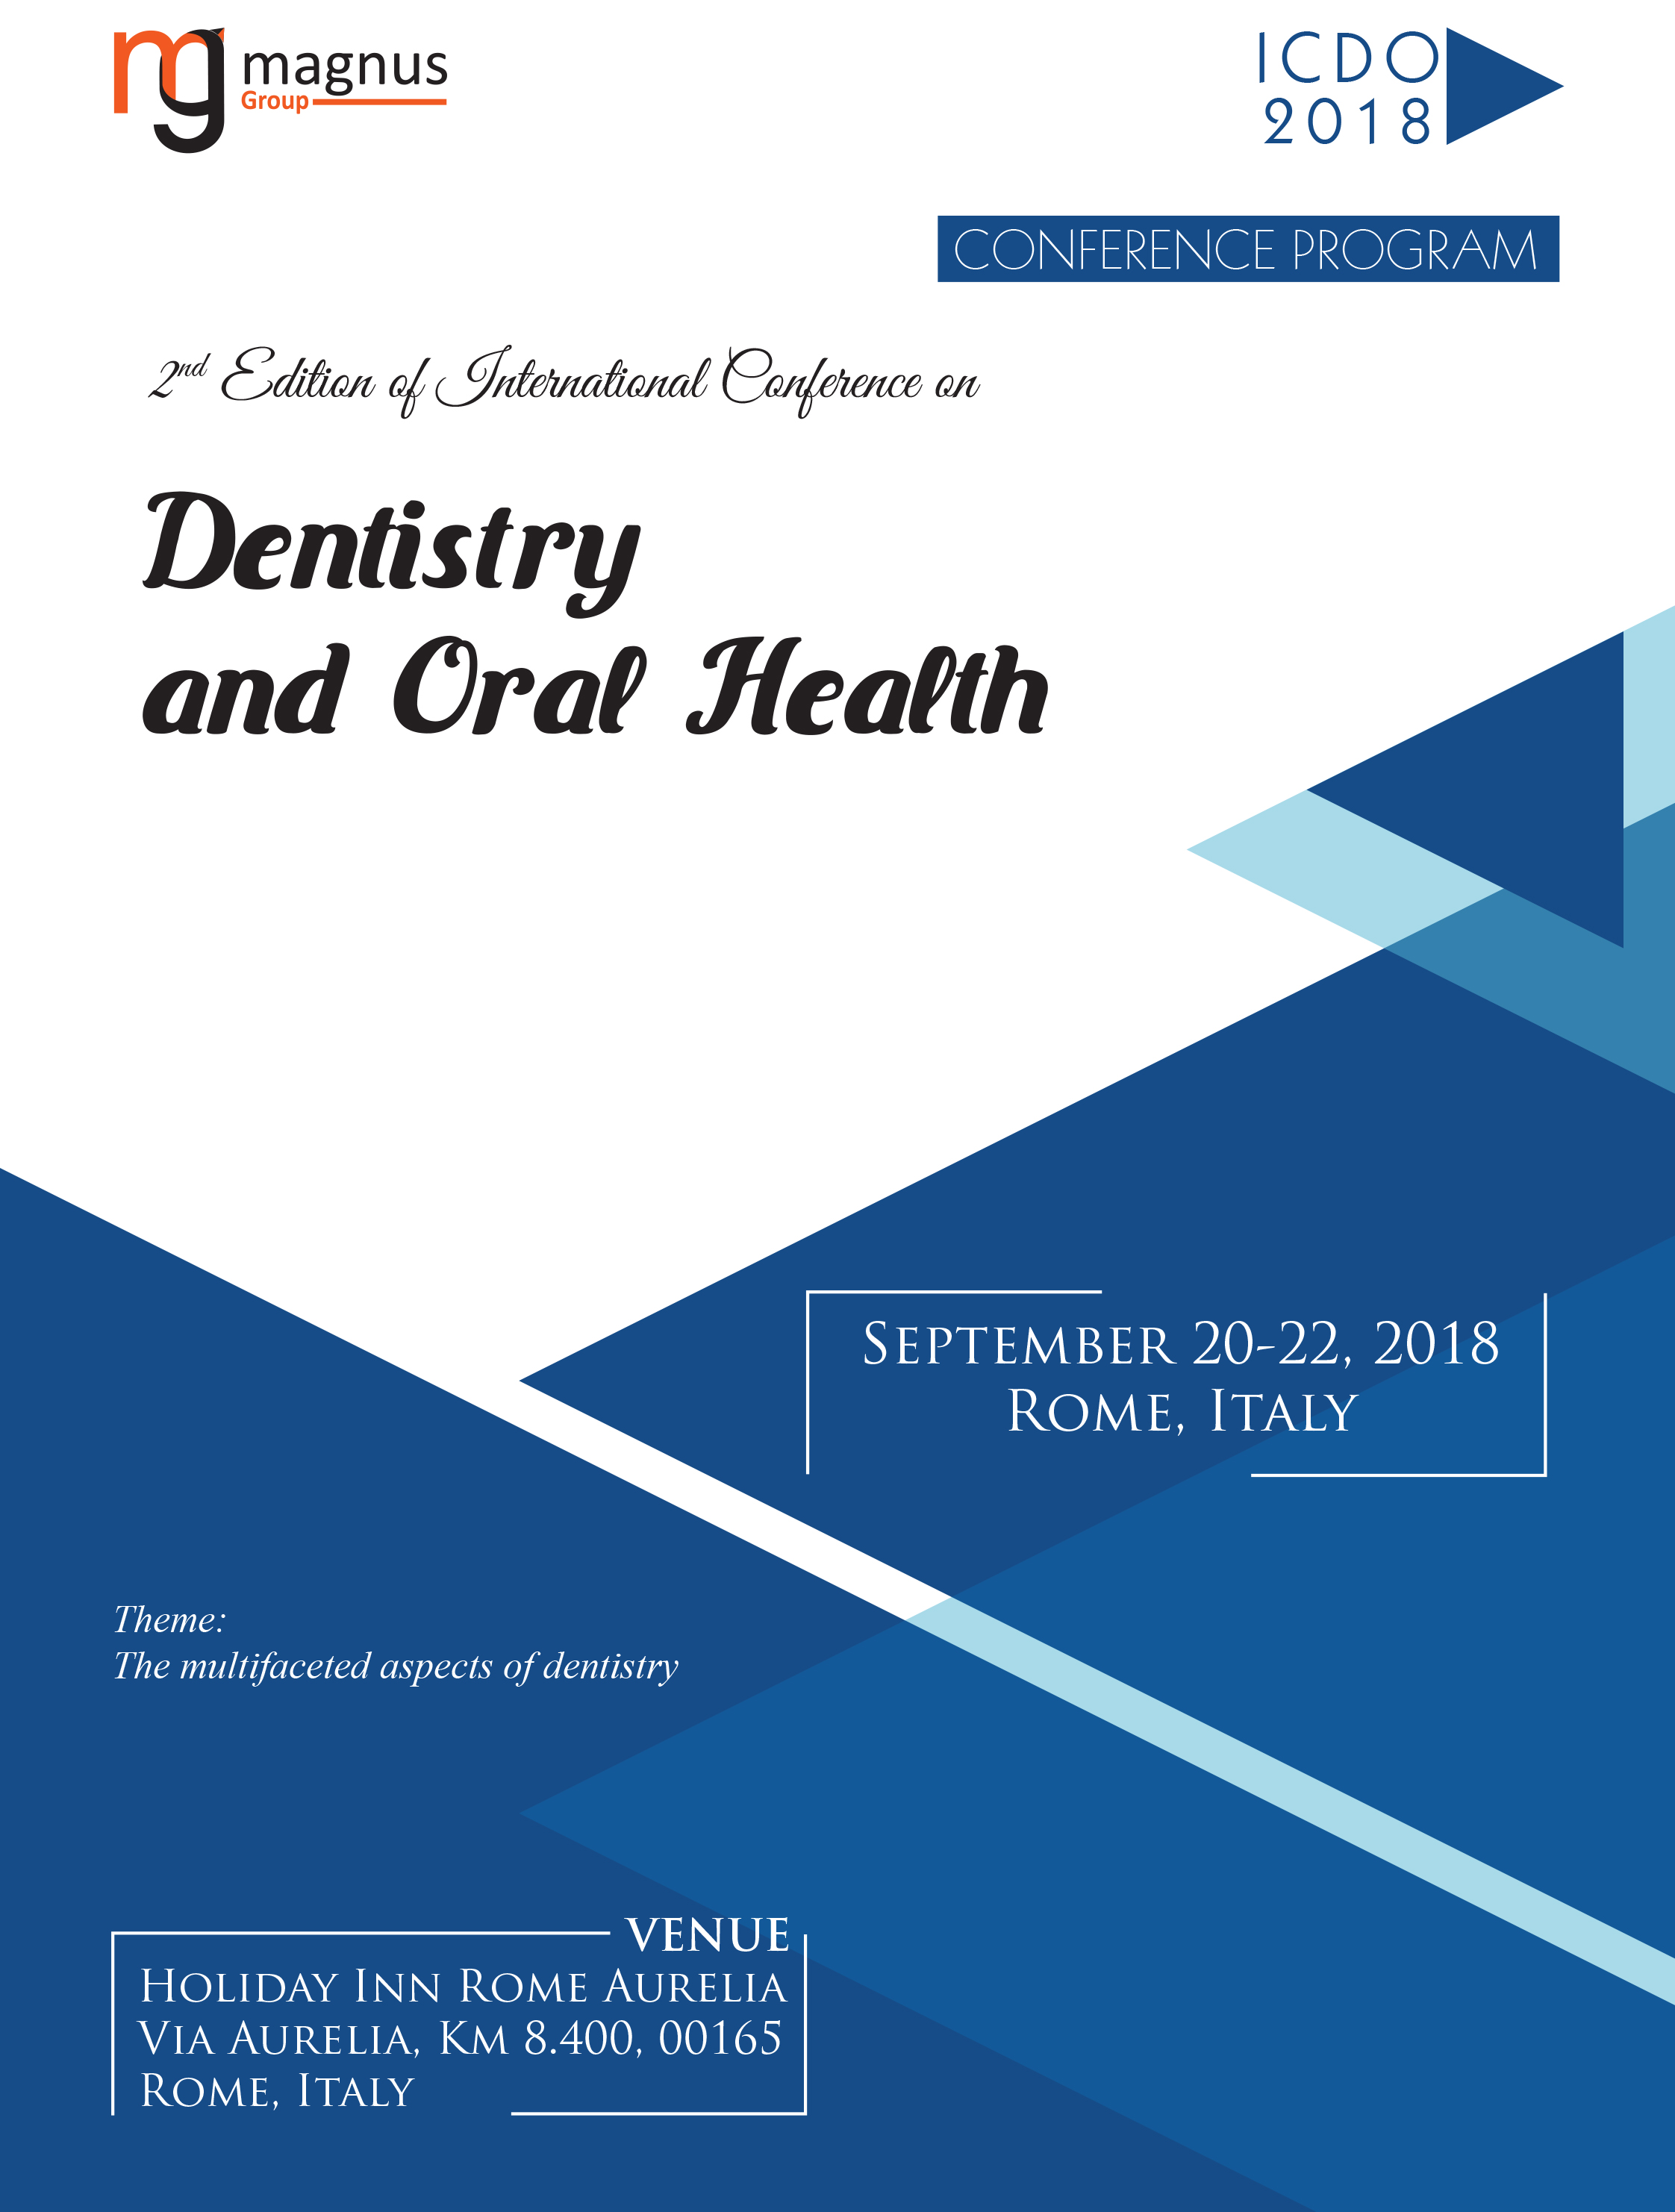 2nd Edition of International Conference on  Dentistry and Oral Health  | Rome, Italy Program